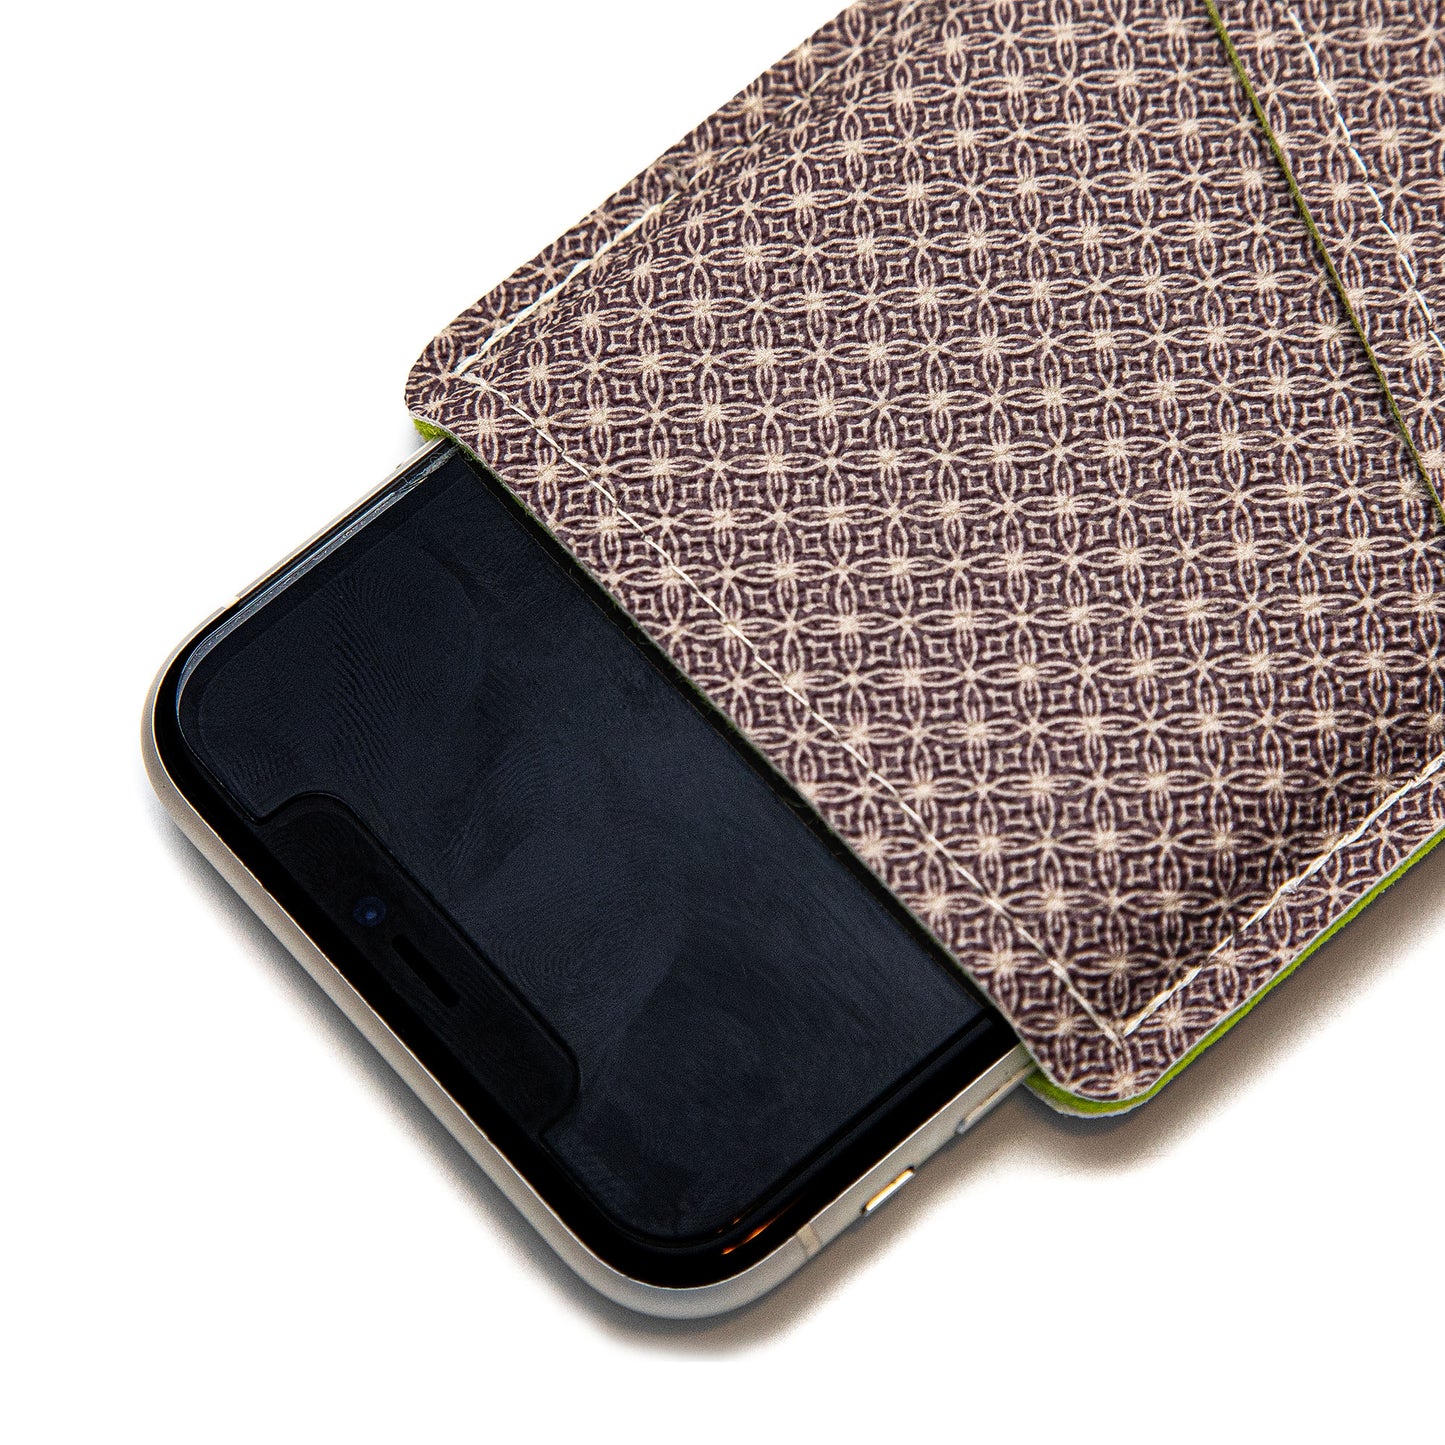 Modern Faux Leather iPhone Sleeve with Abstract Eggplant Pattern Design and Card Pocket